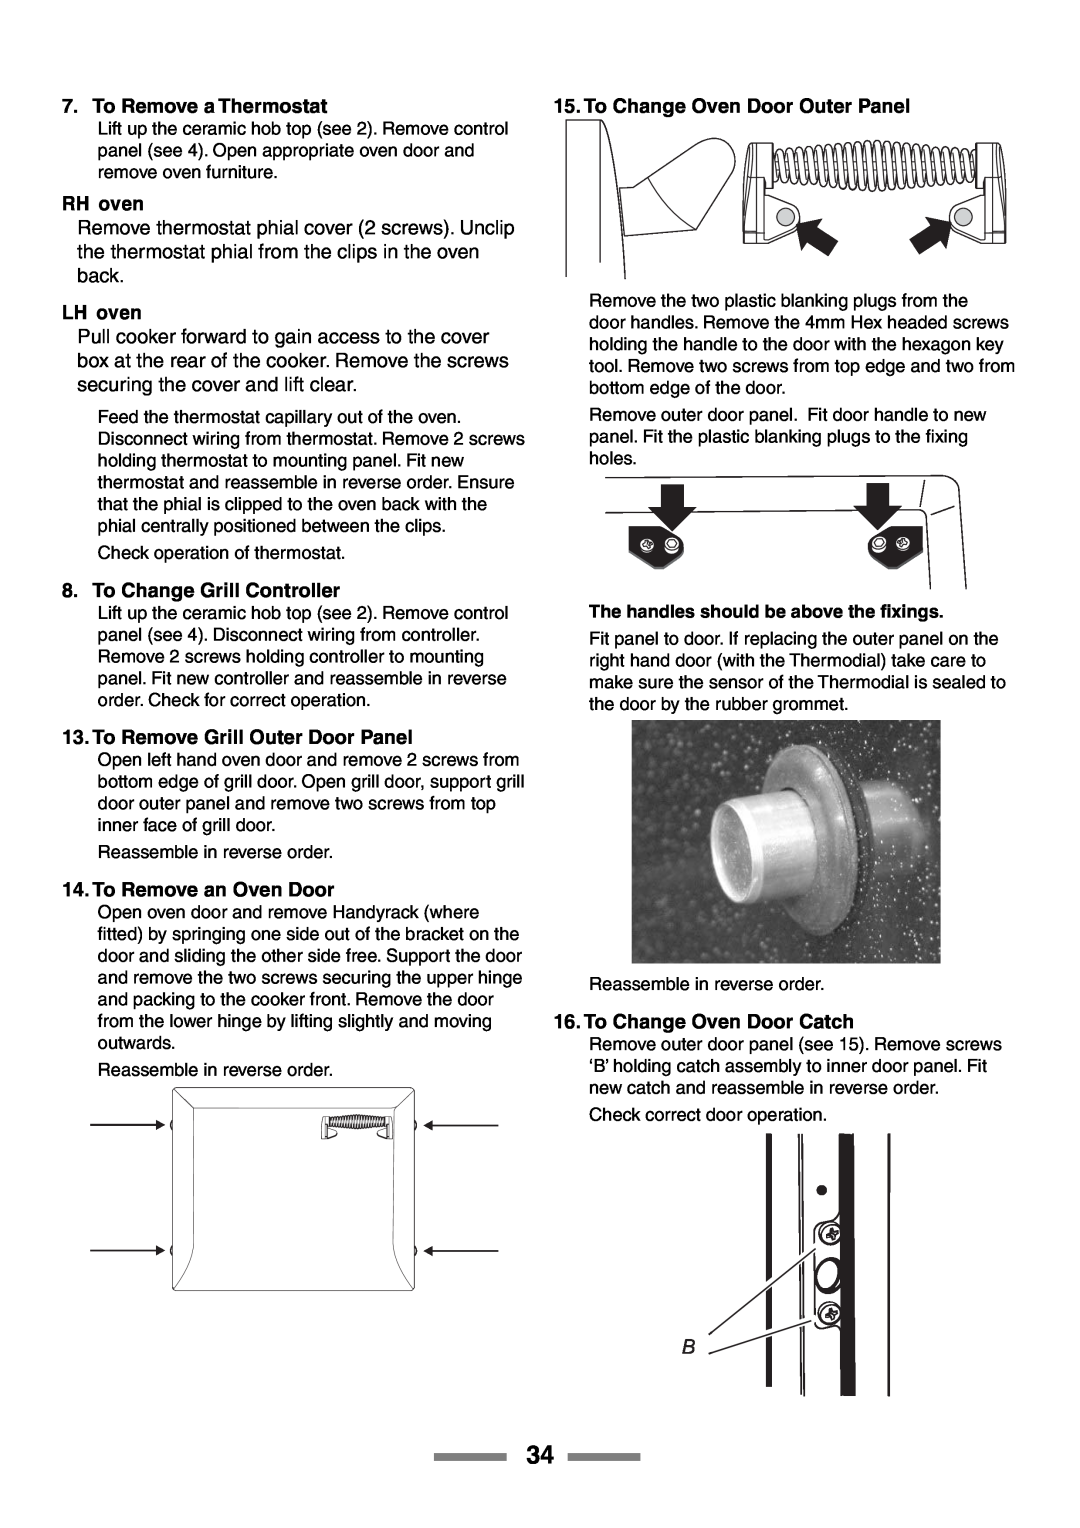 Rangemaster U105510-01 manual To Remove a Thermostat, RH oven, LH oven, To Change Grill Controller, To Remove an Oven Door 